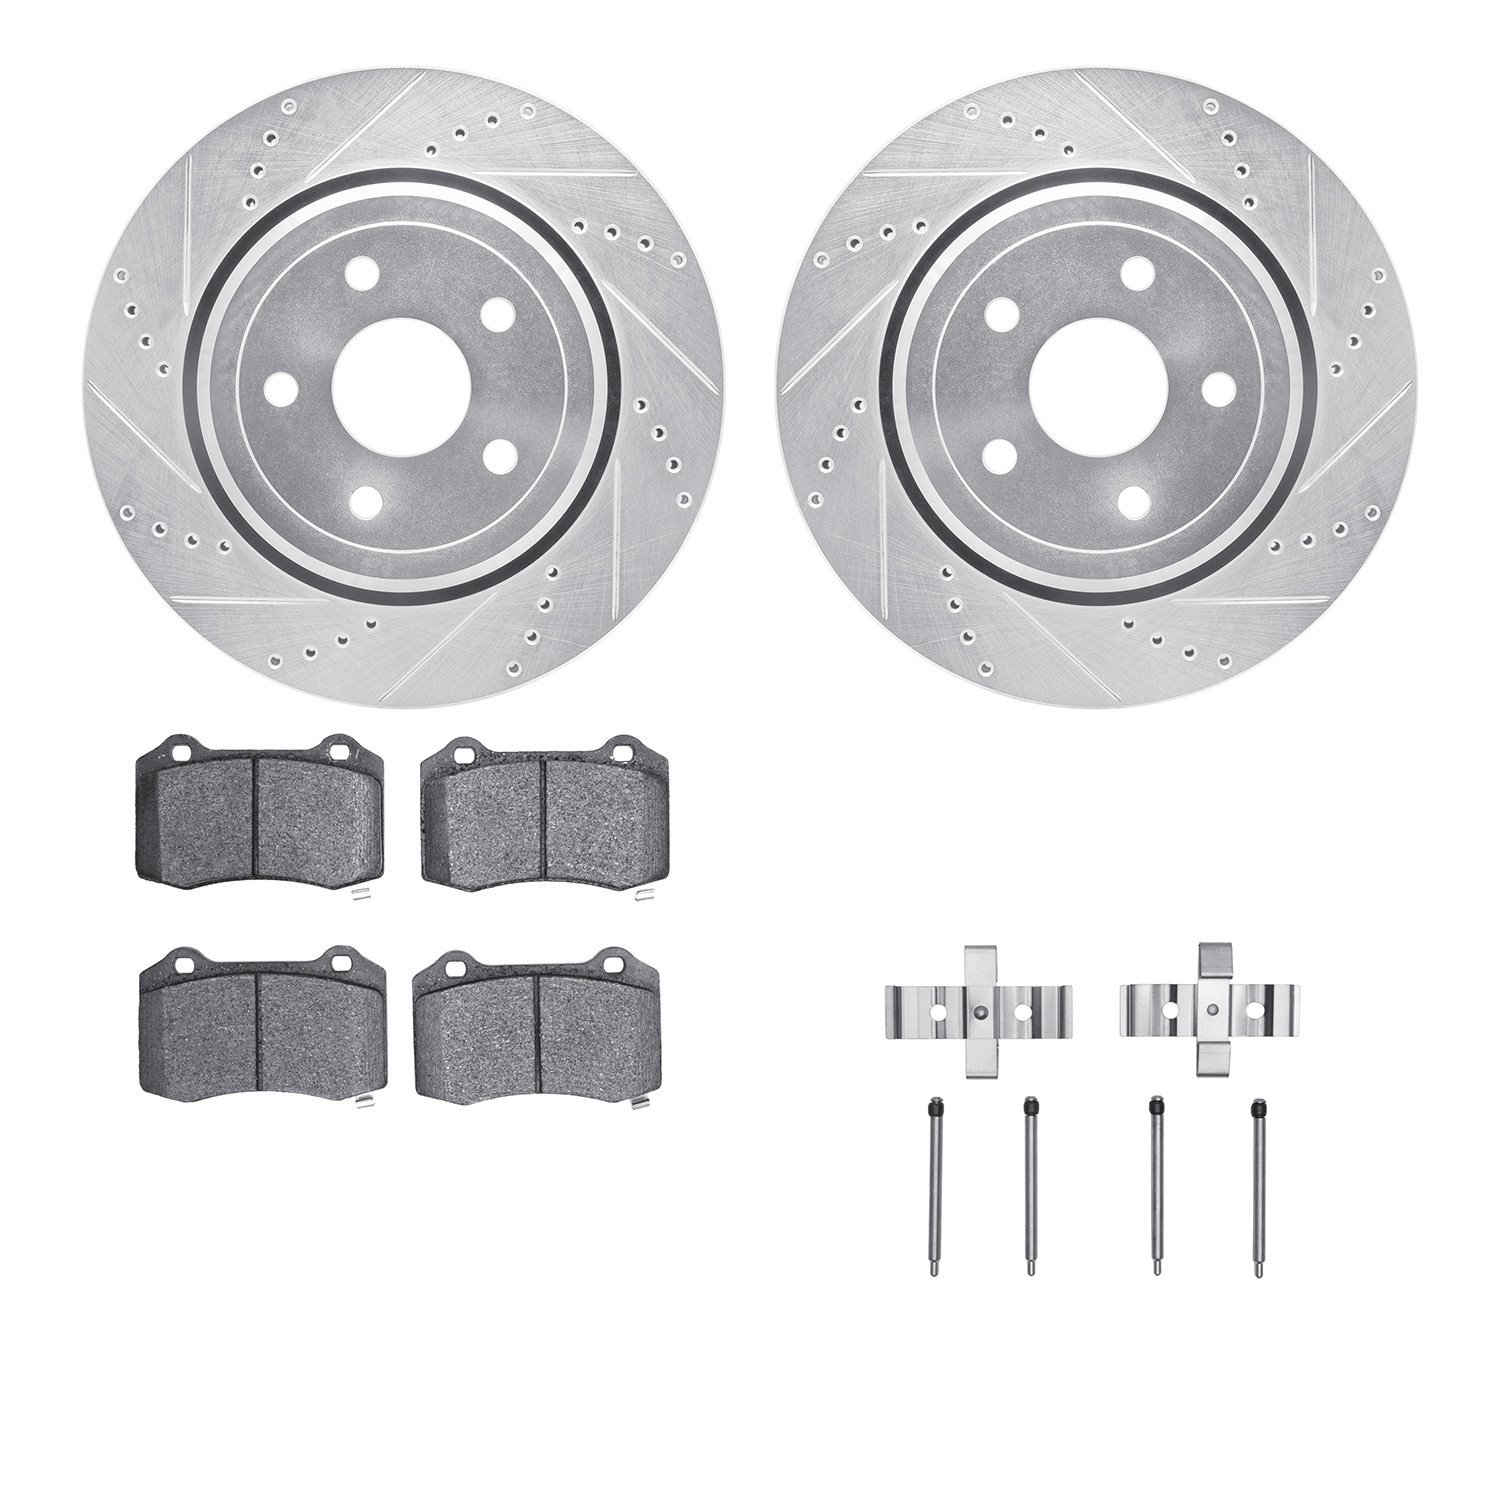 7412-42010 Drilled/Slotted Brake Rotors with Ultimate-Duty Brake Pads Kit & Hardware [Silver], Fits Select Mopar, Position: Rear